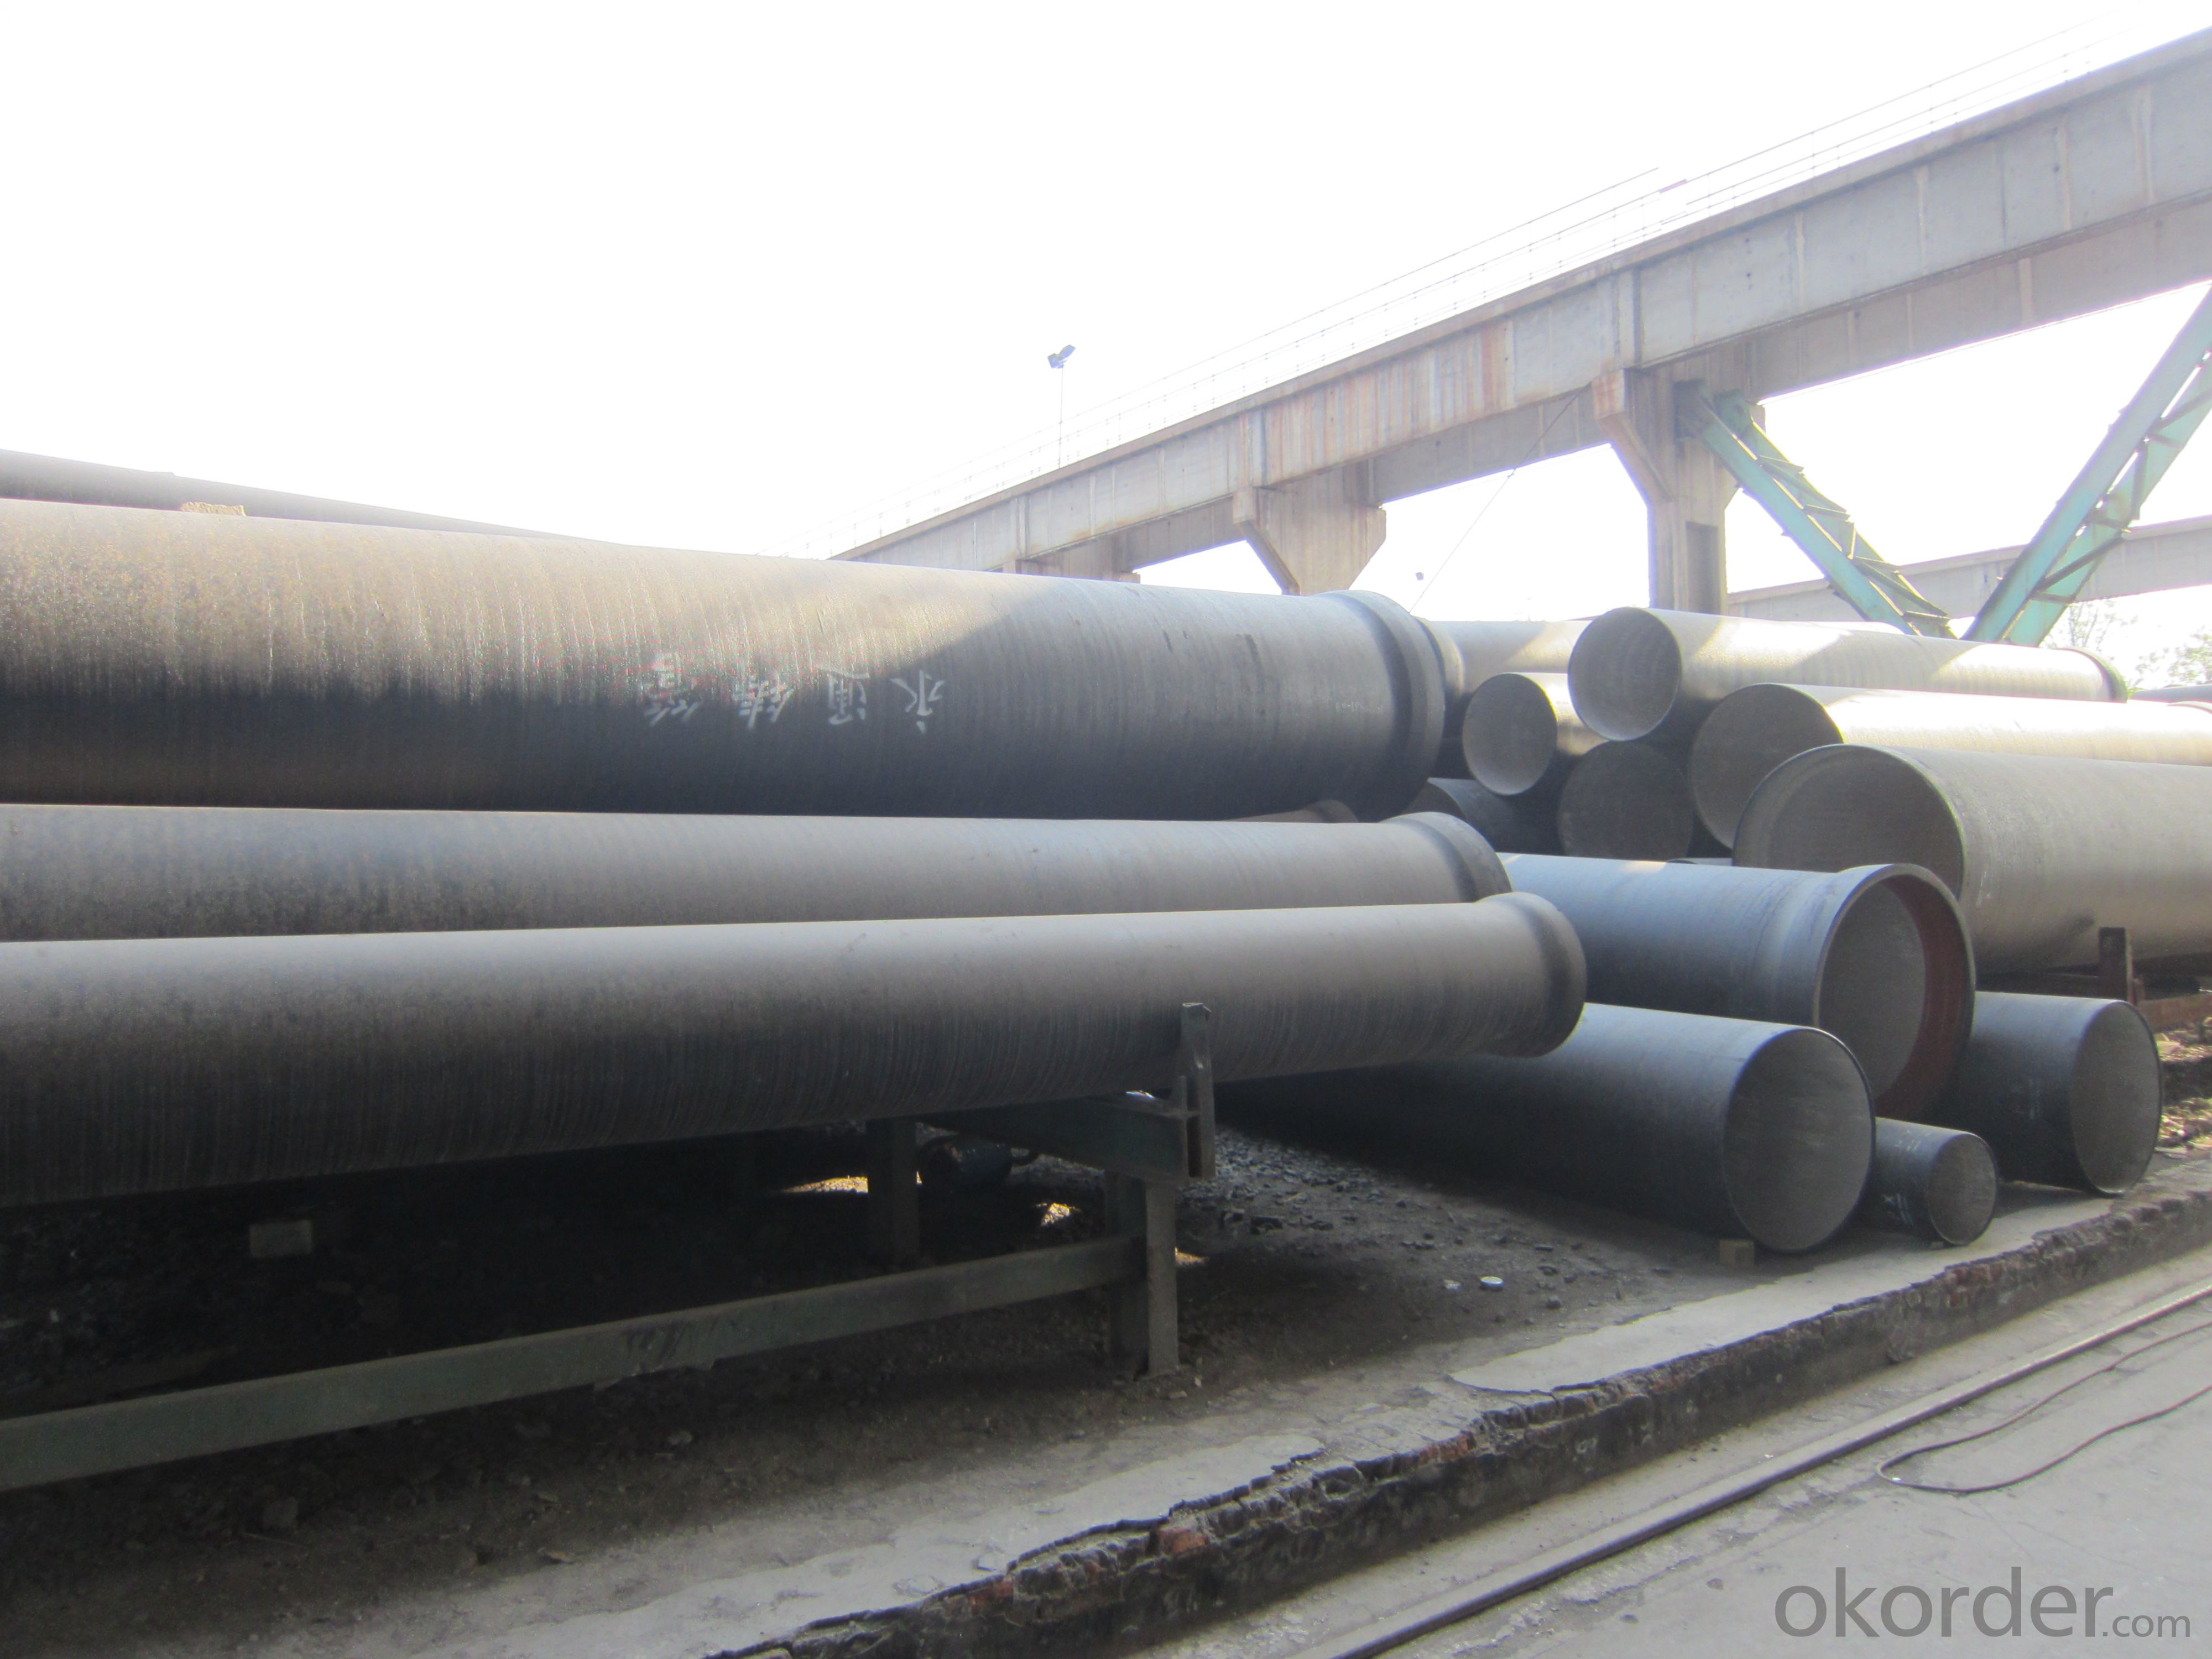 Ductile Iron Pipe of China DN80-DN800 K8 EN545 Top Sale